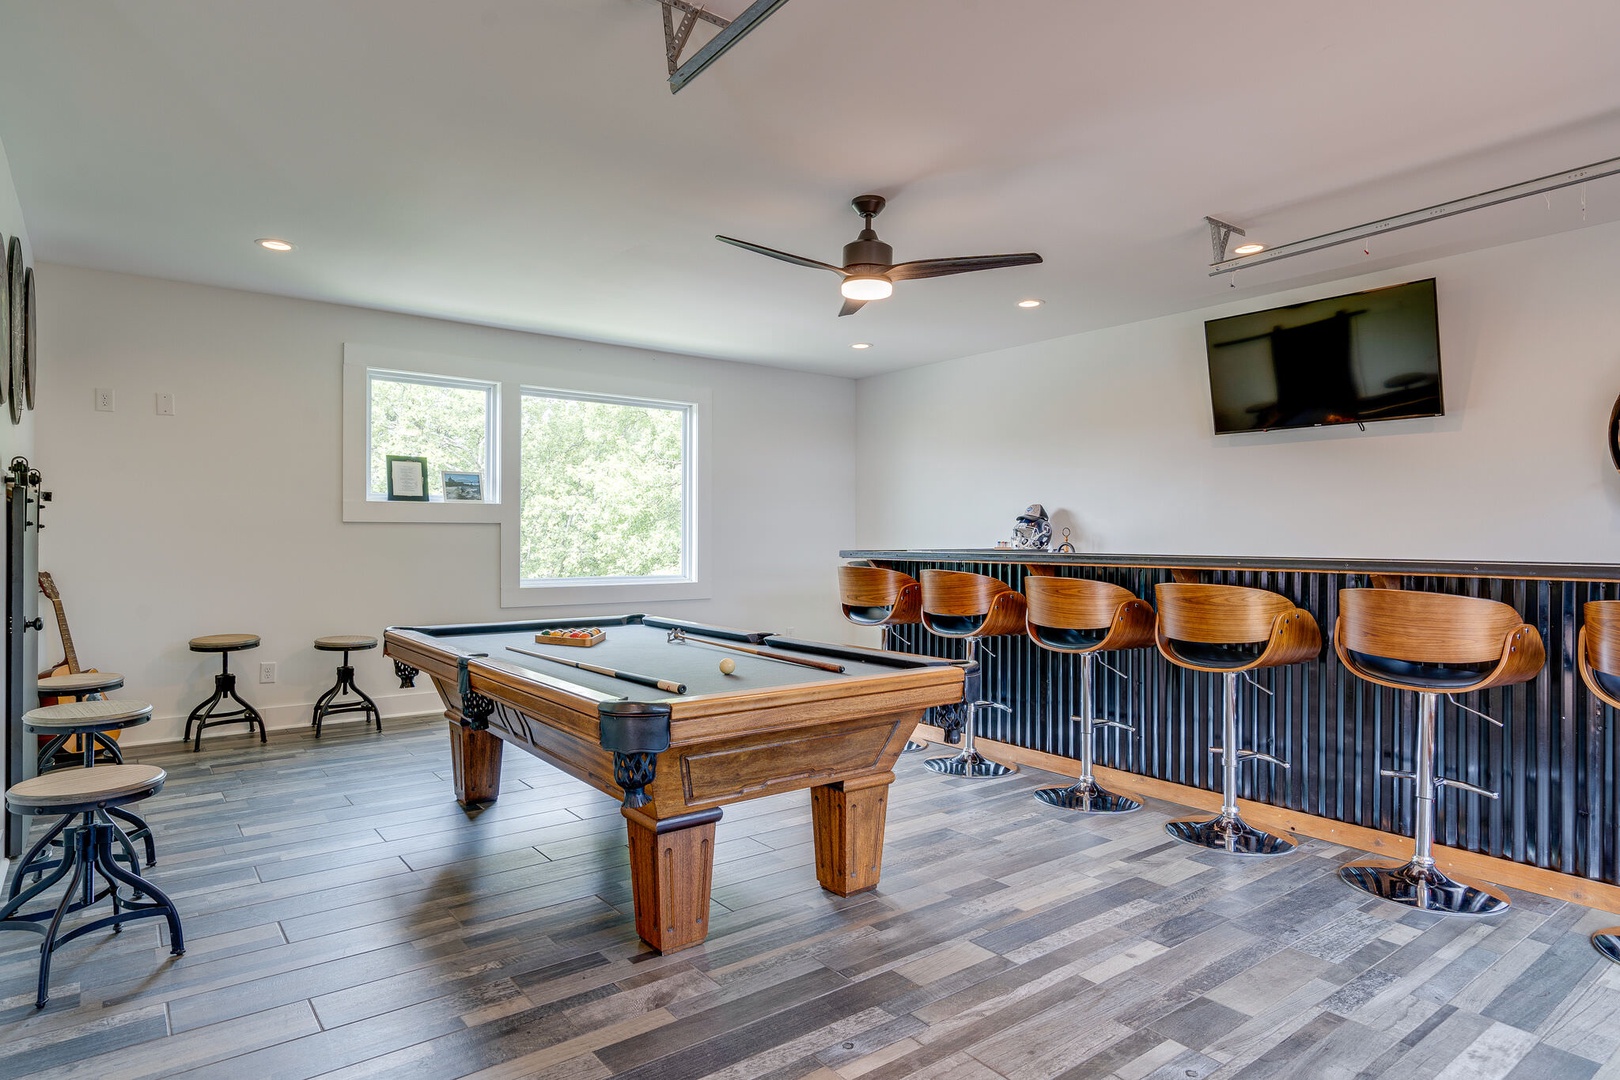 Game room with pool table and TV